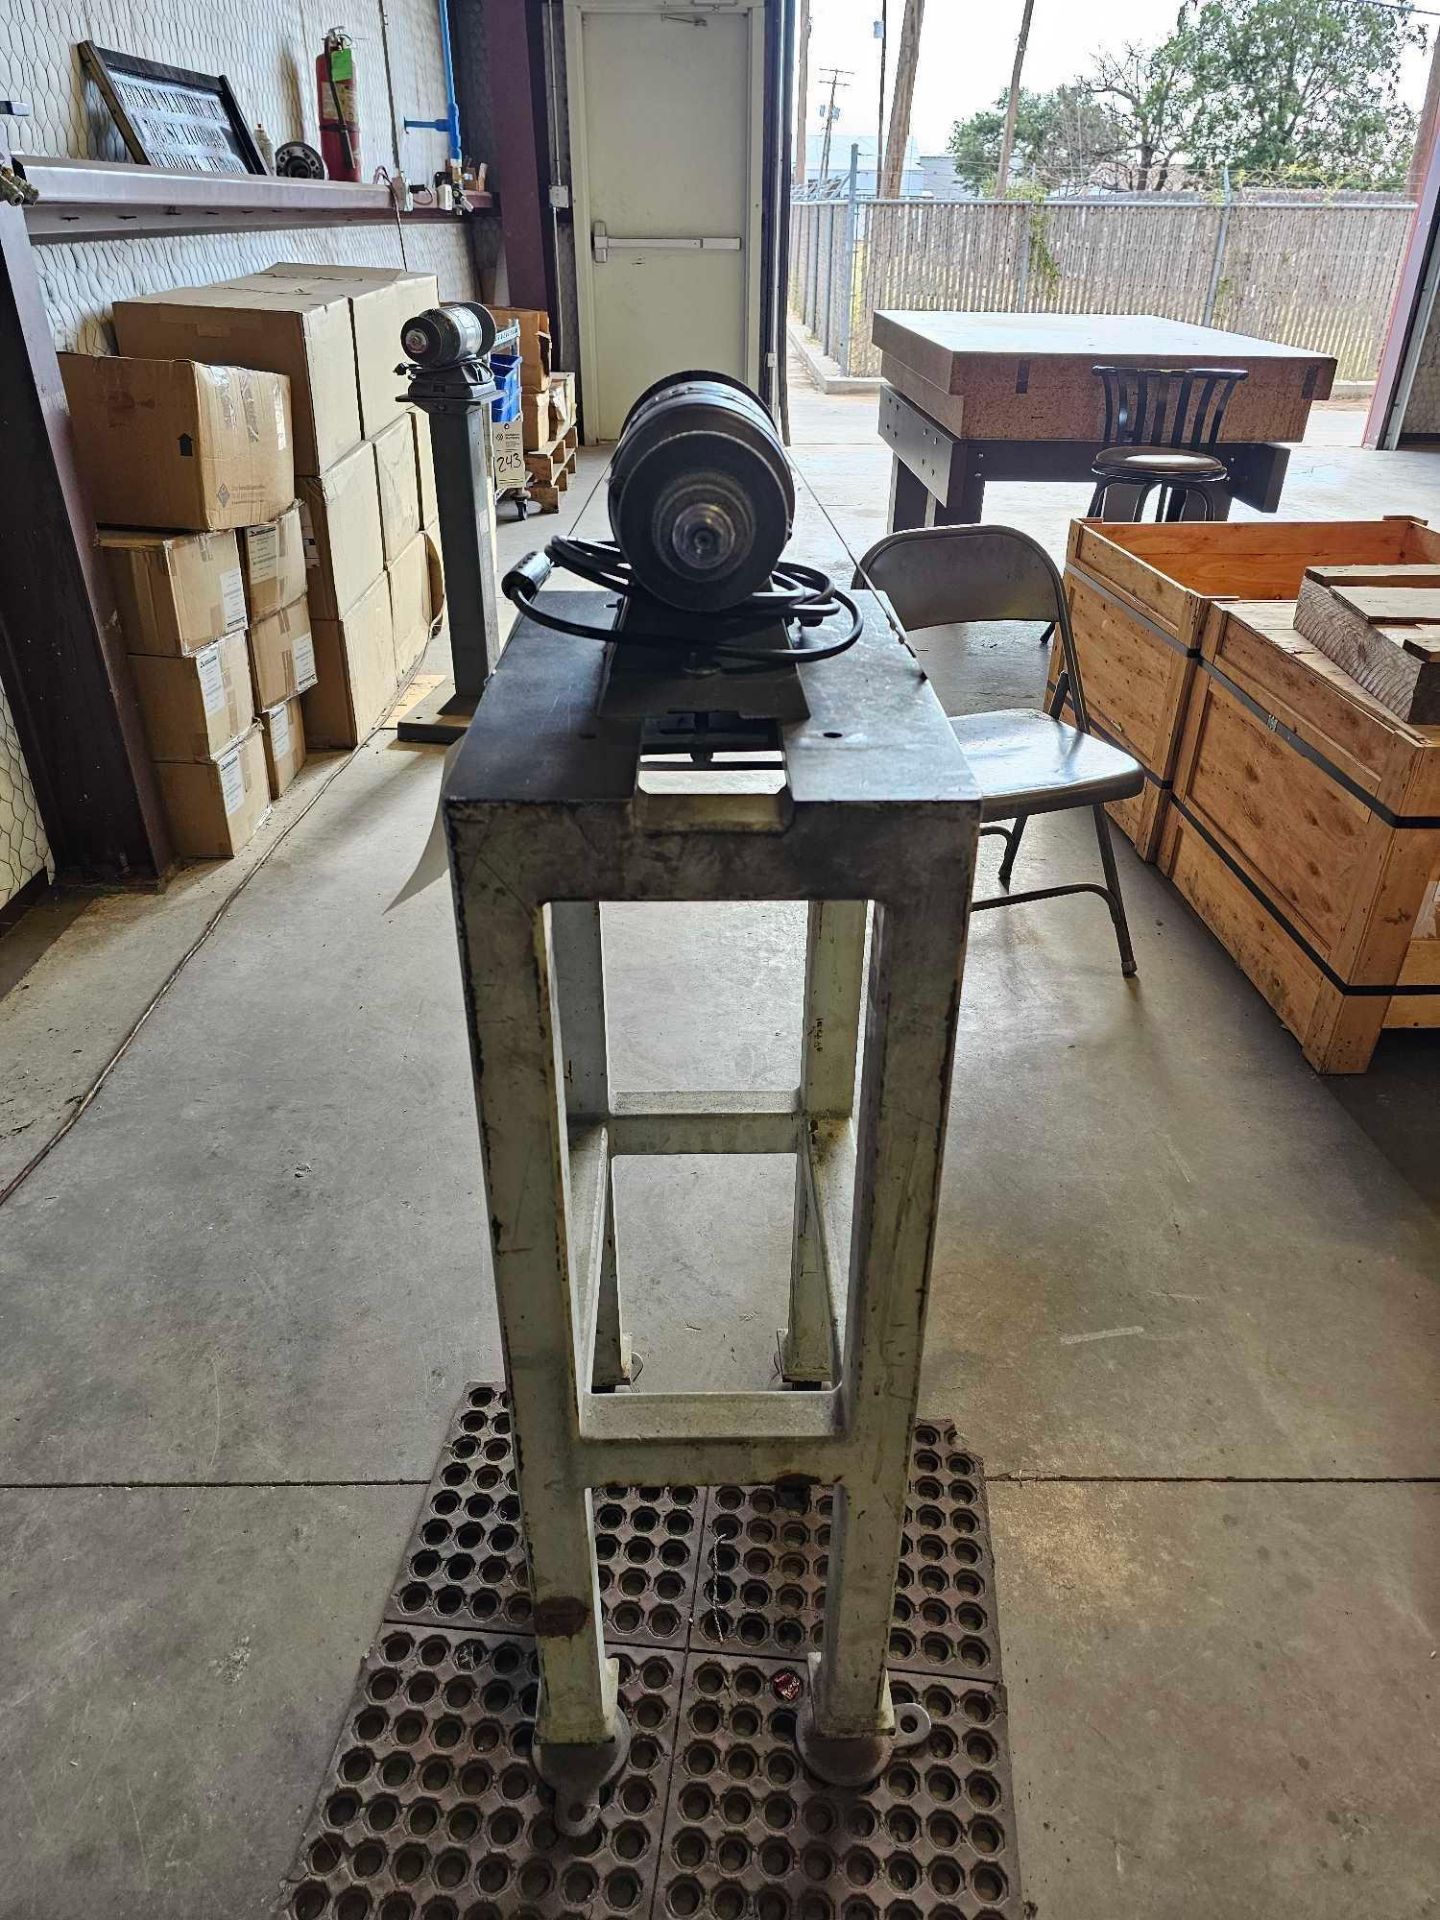 DELTA SHOPMASTER 6" BENCH GRINDER WITH STAND - Image 3 of 7